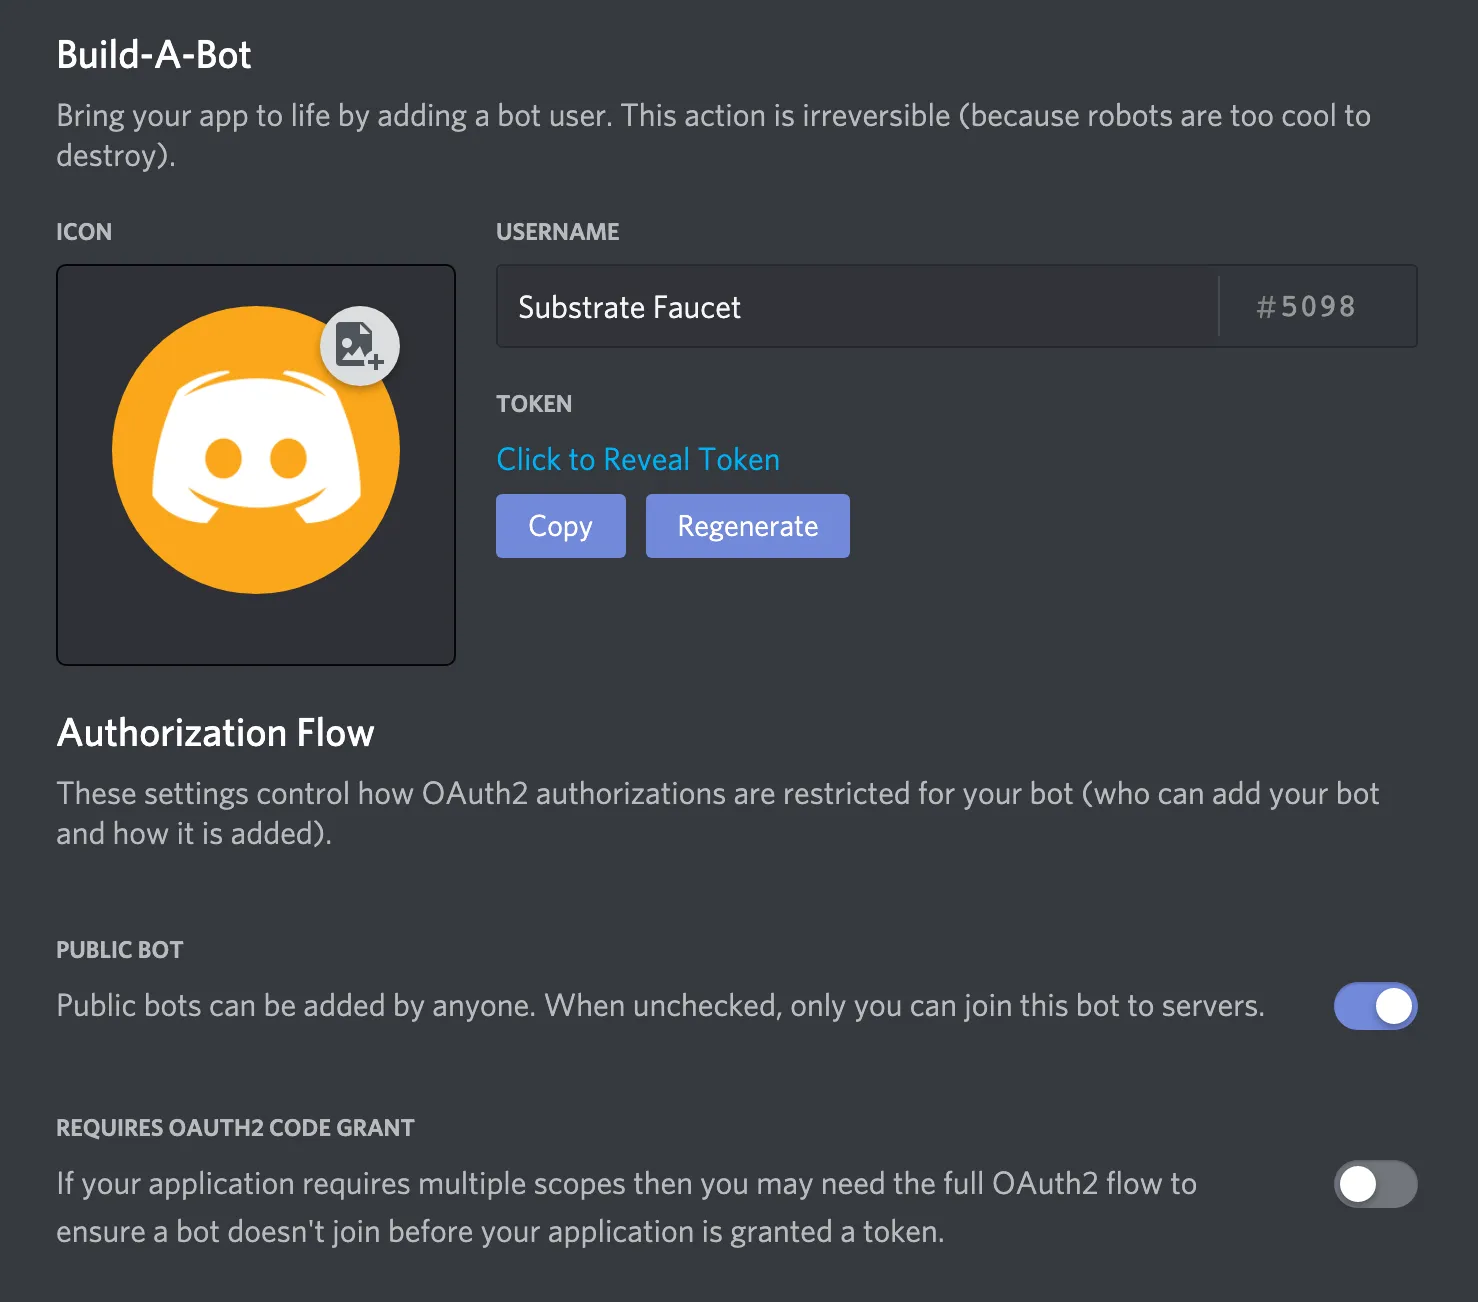 How to build a Substrate Faucet with Discord Bot and Node.js